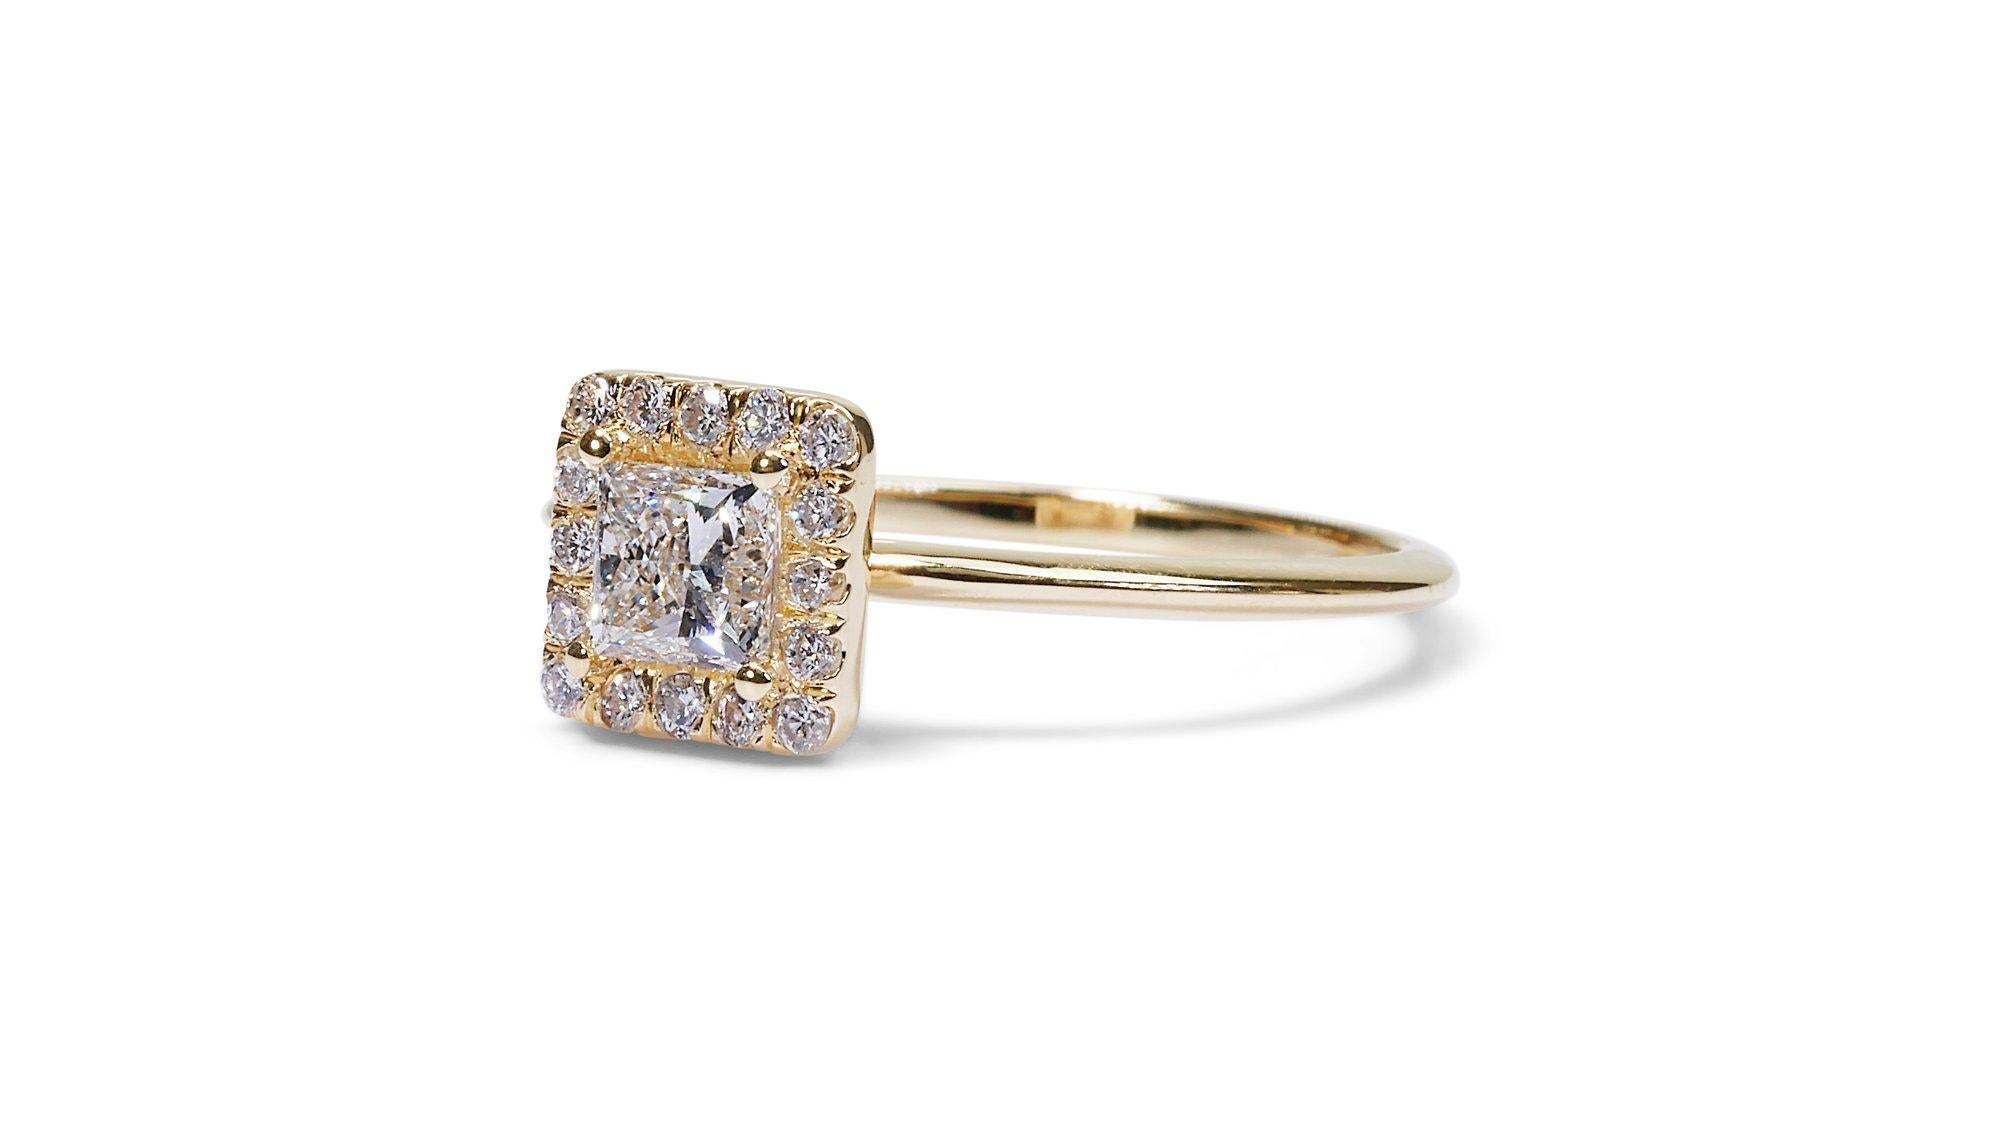 Women's Dazzling 18k Yellow gold Halo Princess Ring w/ 0.67 ct natural diamonds AIG Cert For Sale